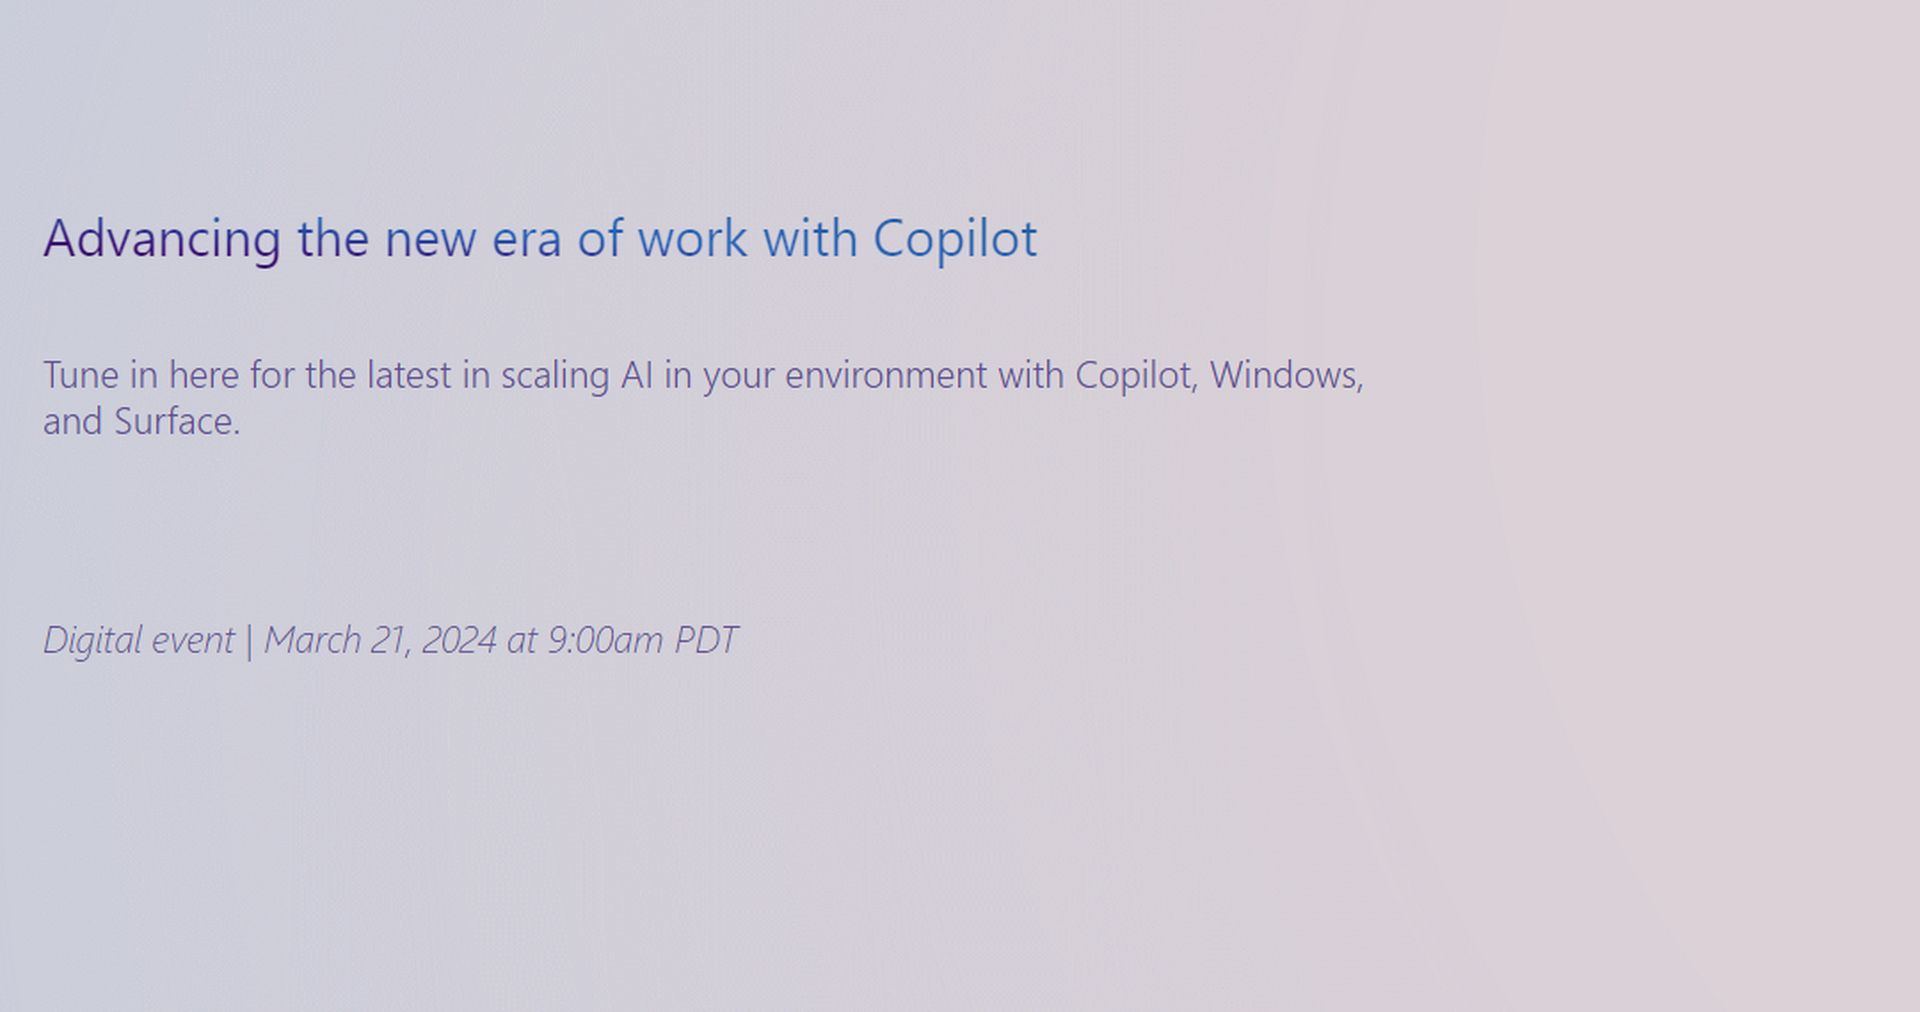 Microsoft's "New Era of Work" event, scheduled for March 21st, 2024